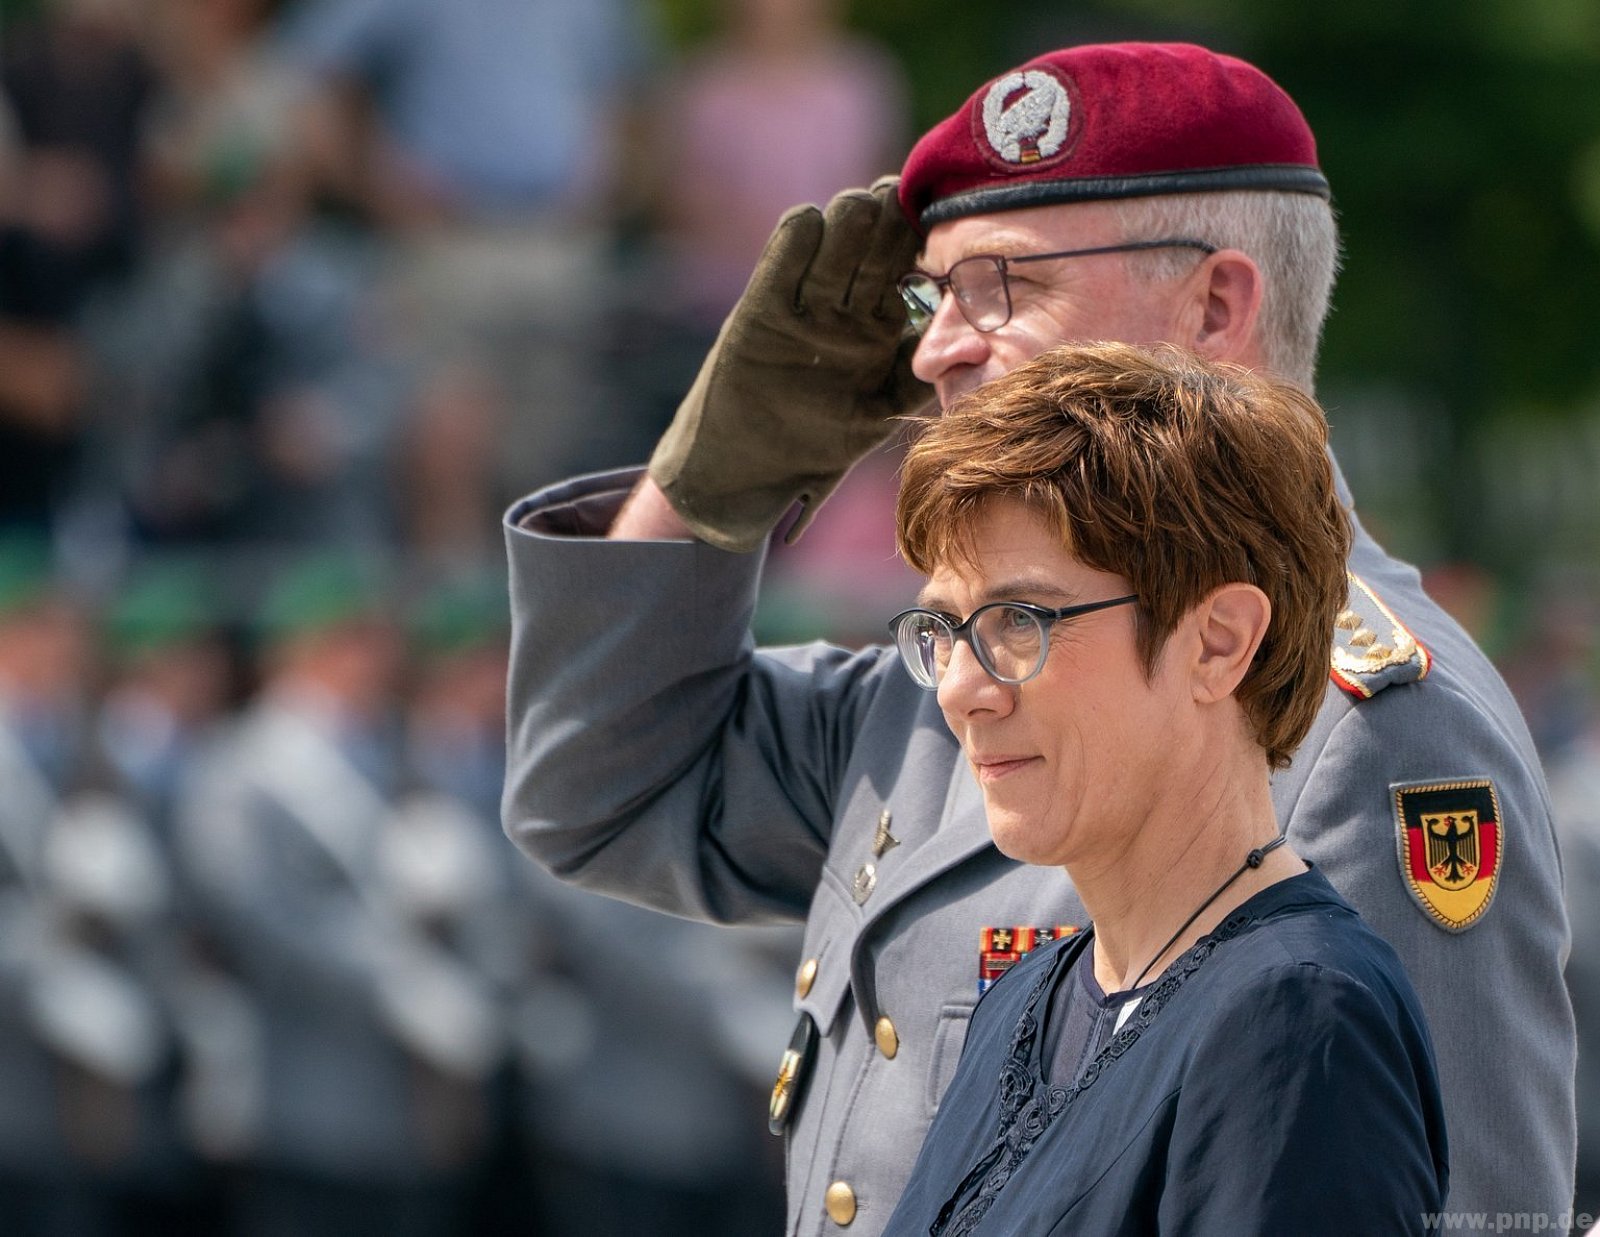 German Defence Minister Annegret Kramp-Karrenbauer and the Inspector General of the German Armed Forces Bundeswehr Eberhard Zorn (left) inspect the guard of honour during a swearing-in ceremony of German Bundeswehr soldiers at the Bendlerblock in Berlin, July 2019.